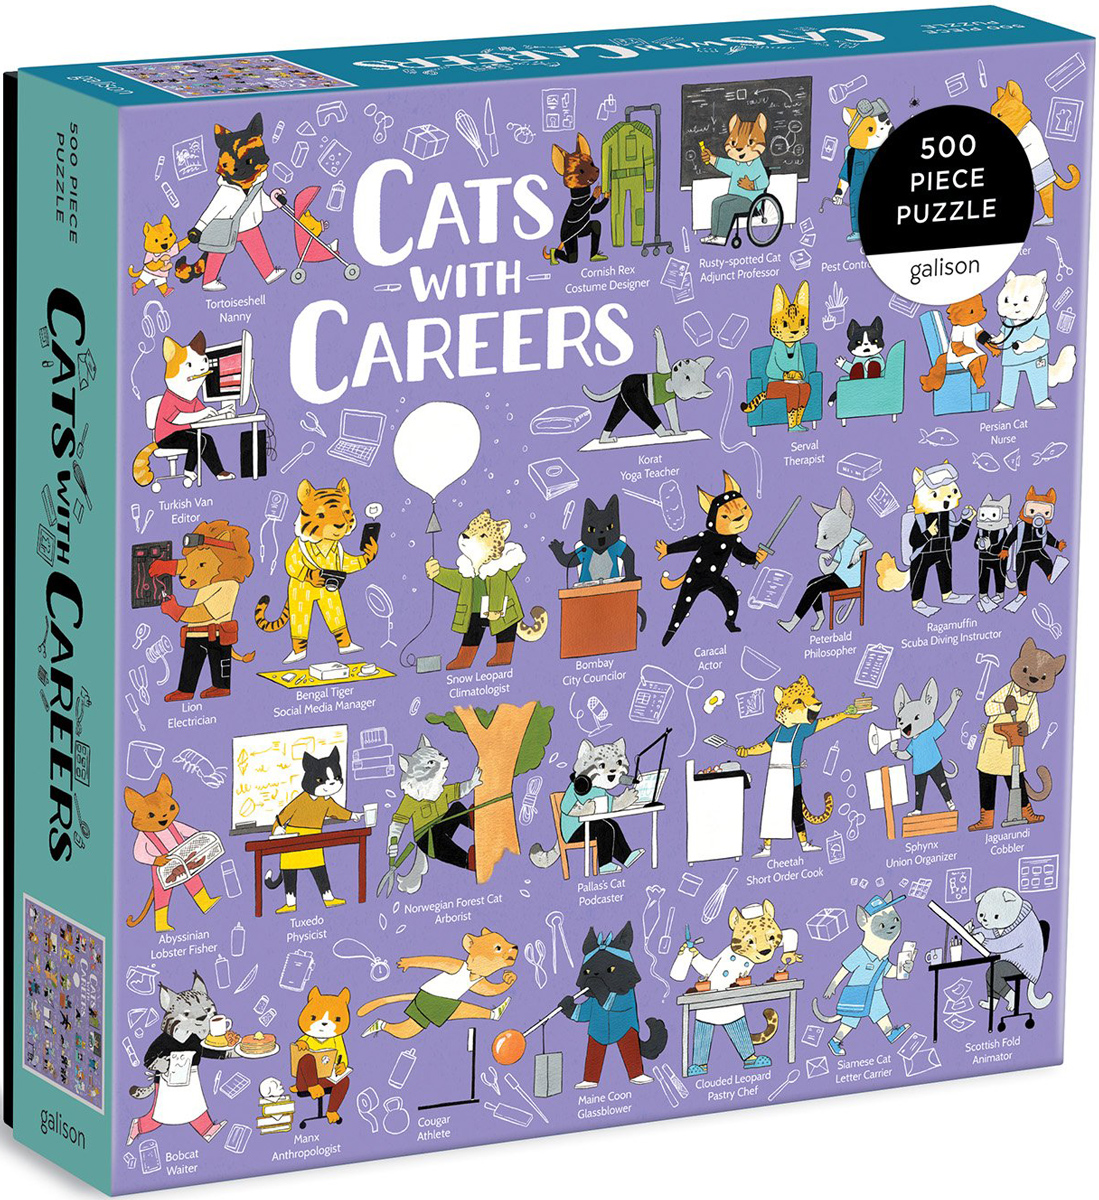 Cats with Careers